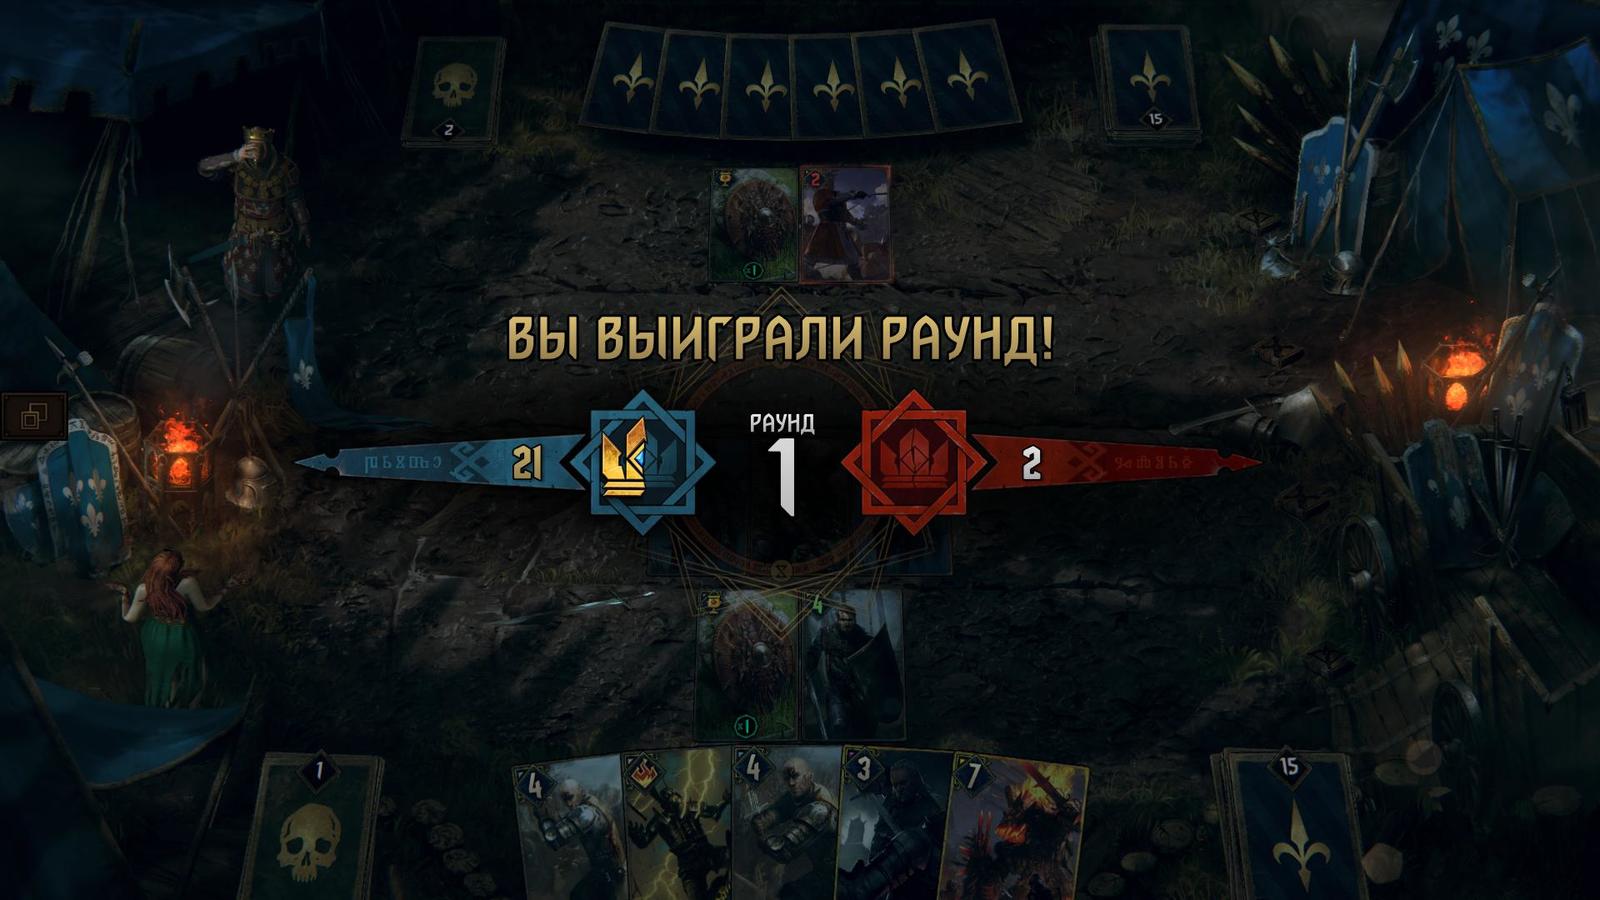 Gwent. - My, Witcher, Gwent, Board games, Online Games, Cards, No rating, Computer games, Computer, Longpost